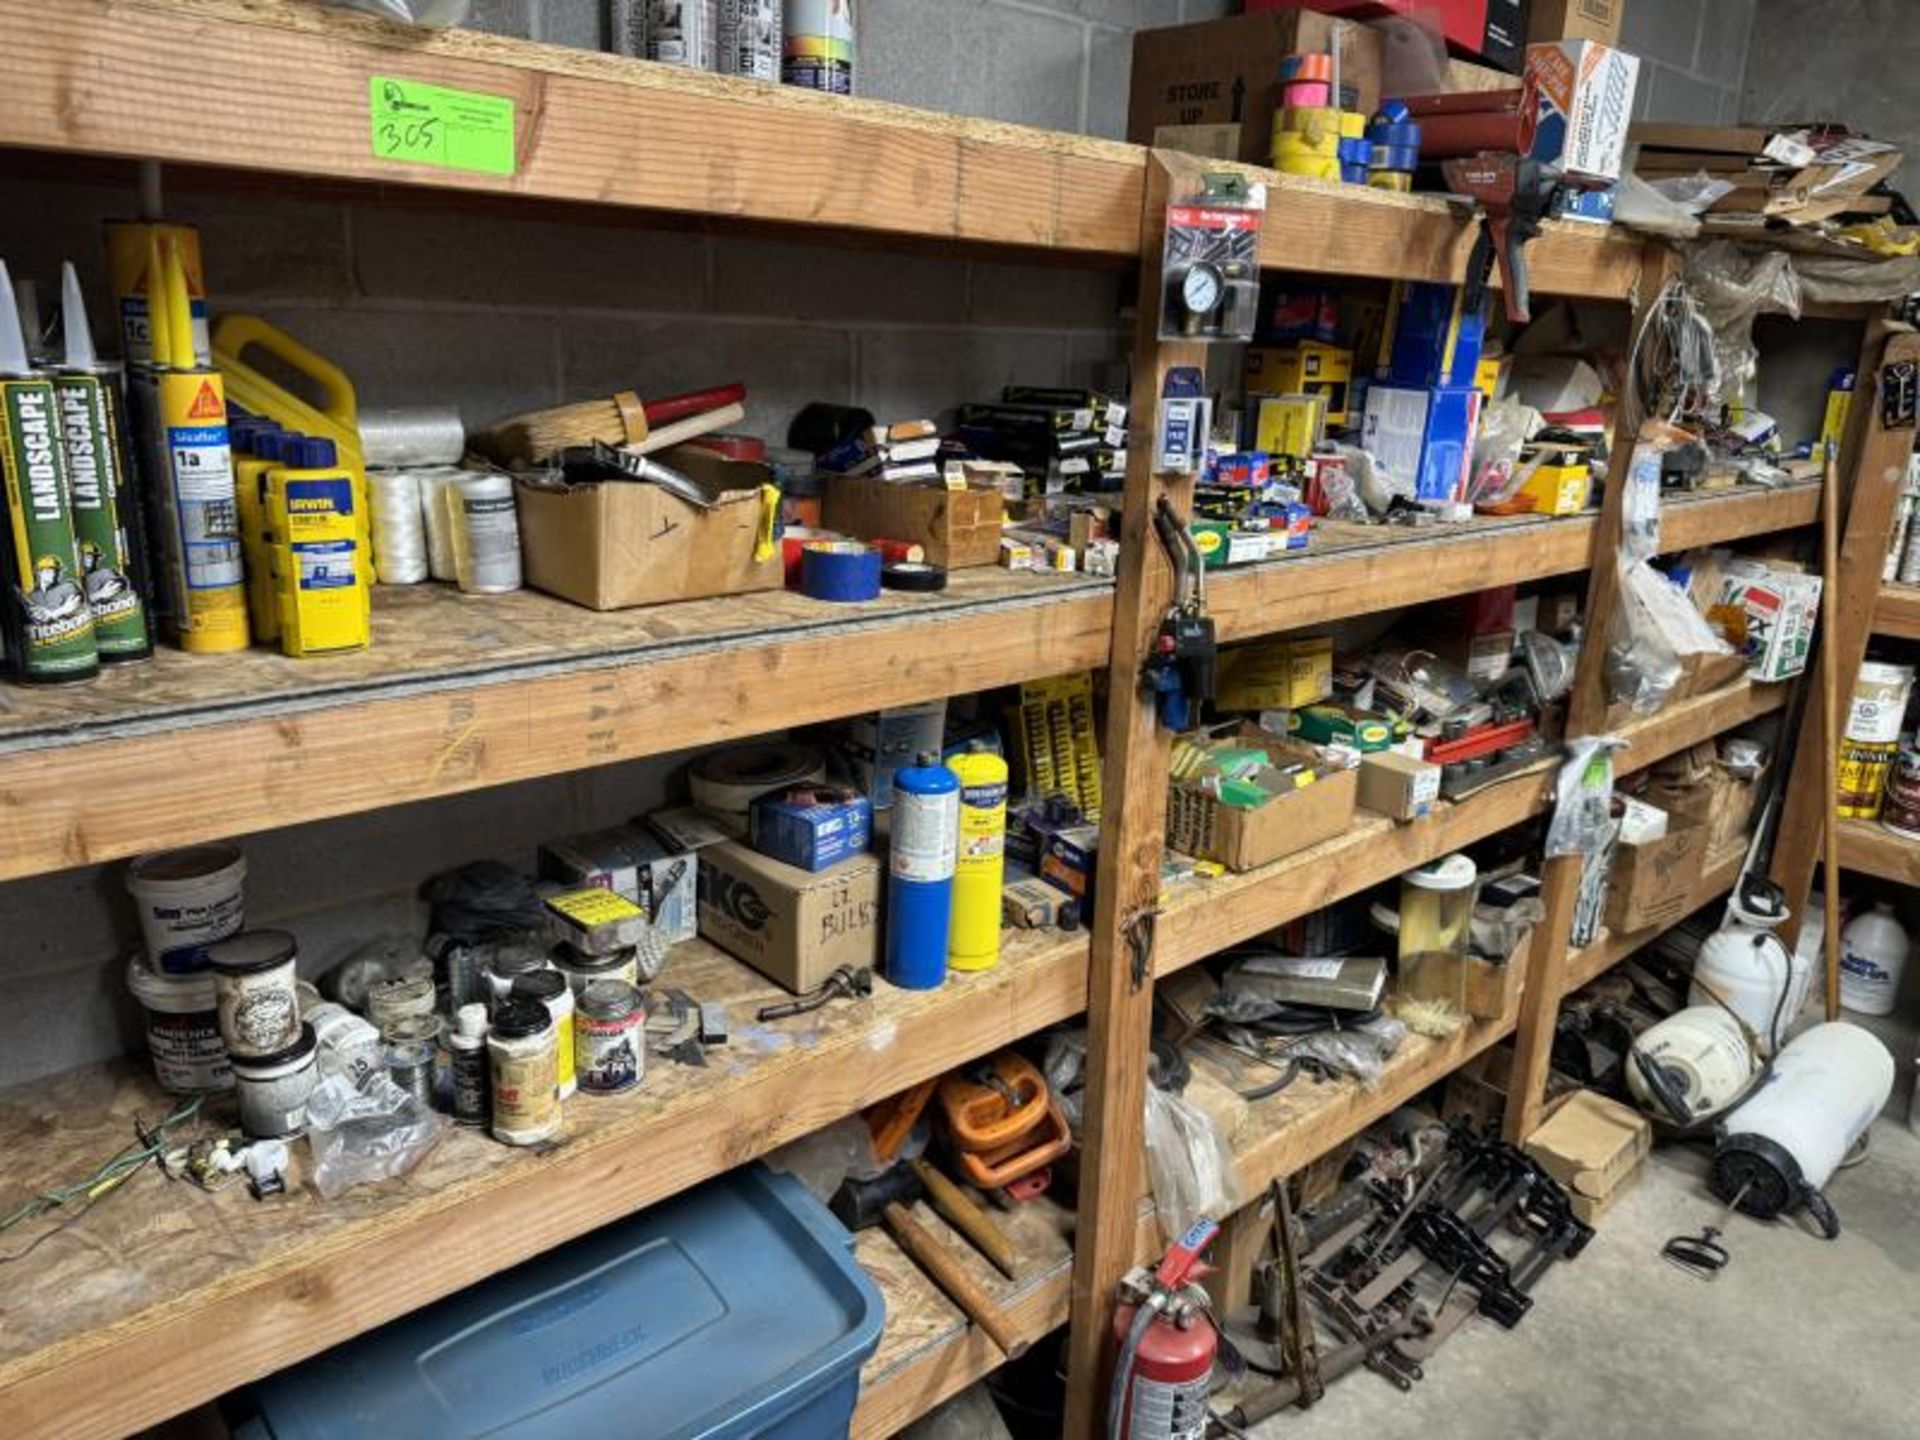 Contents of Shelving Unit (NOT SHELF) Including: Spray Paint, Concrete Adhesive, Vehicles Fuses, Veh